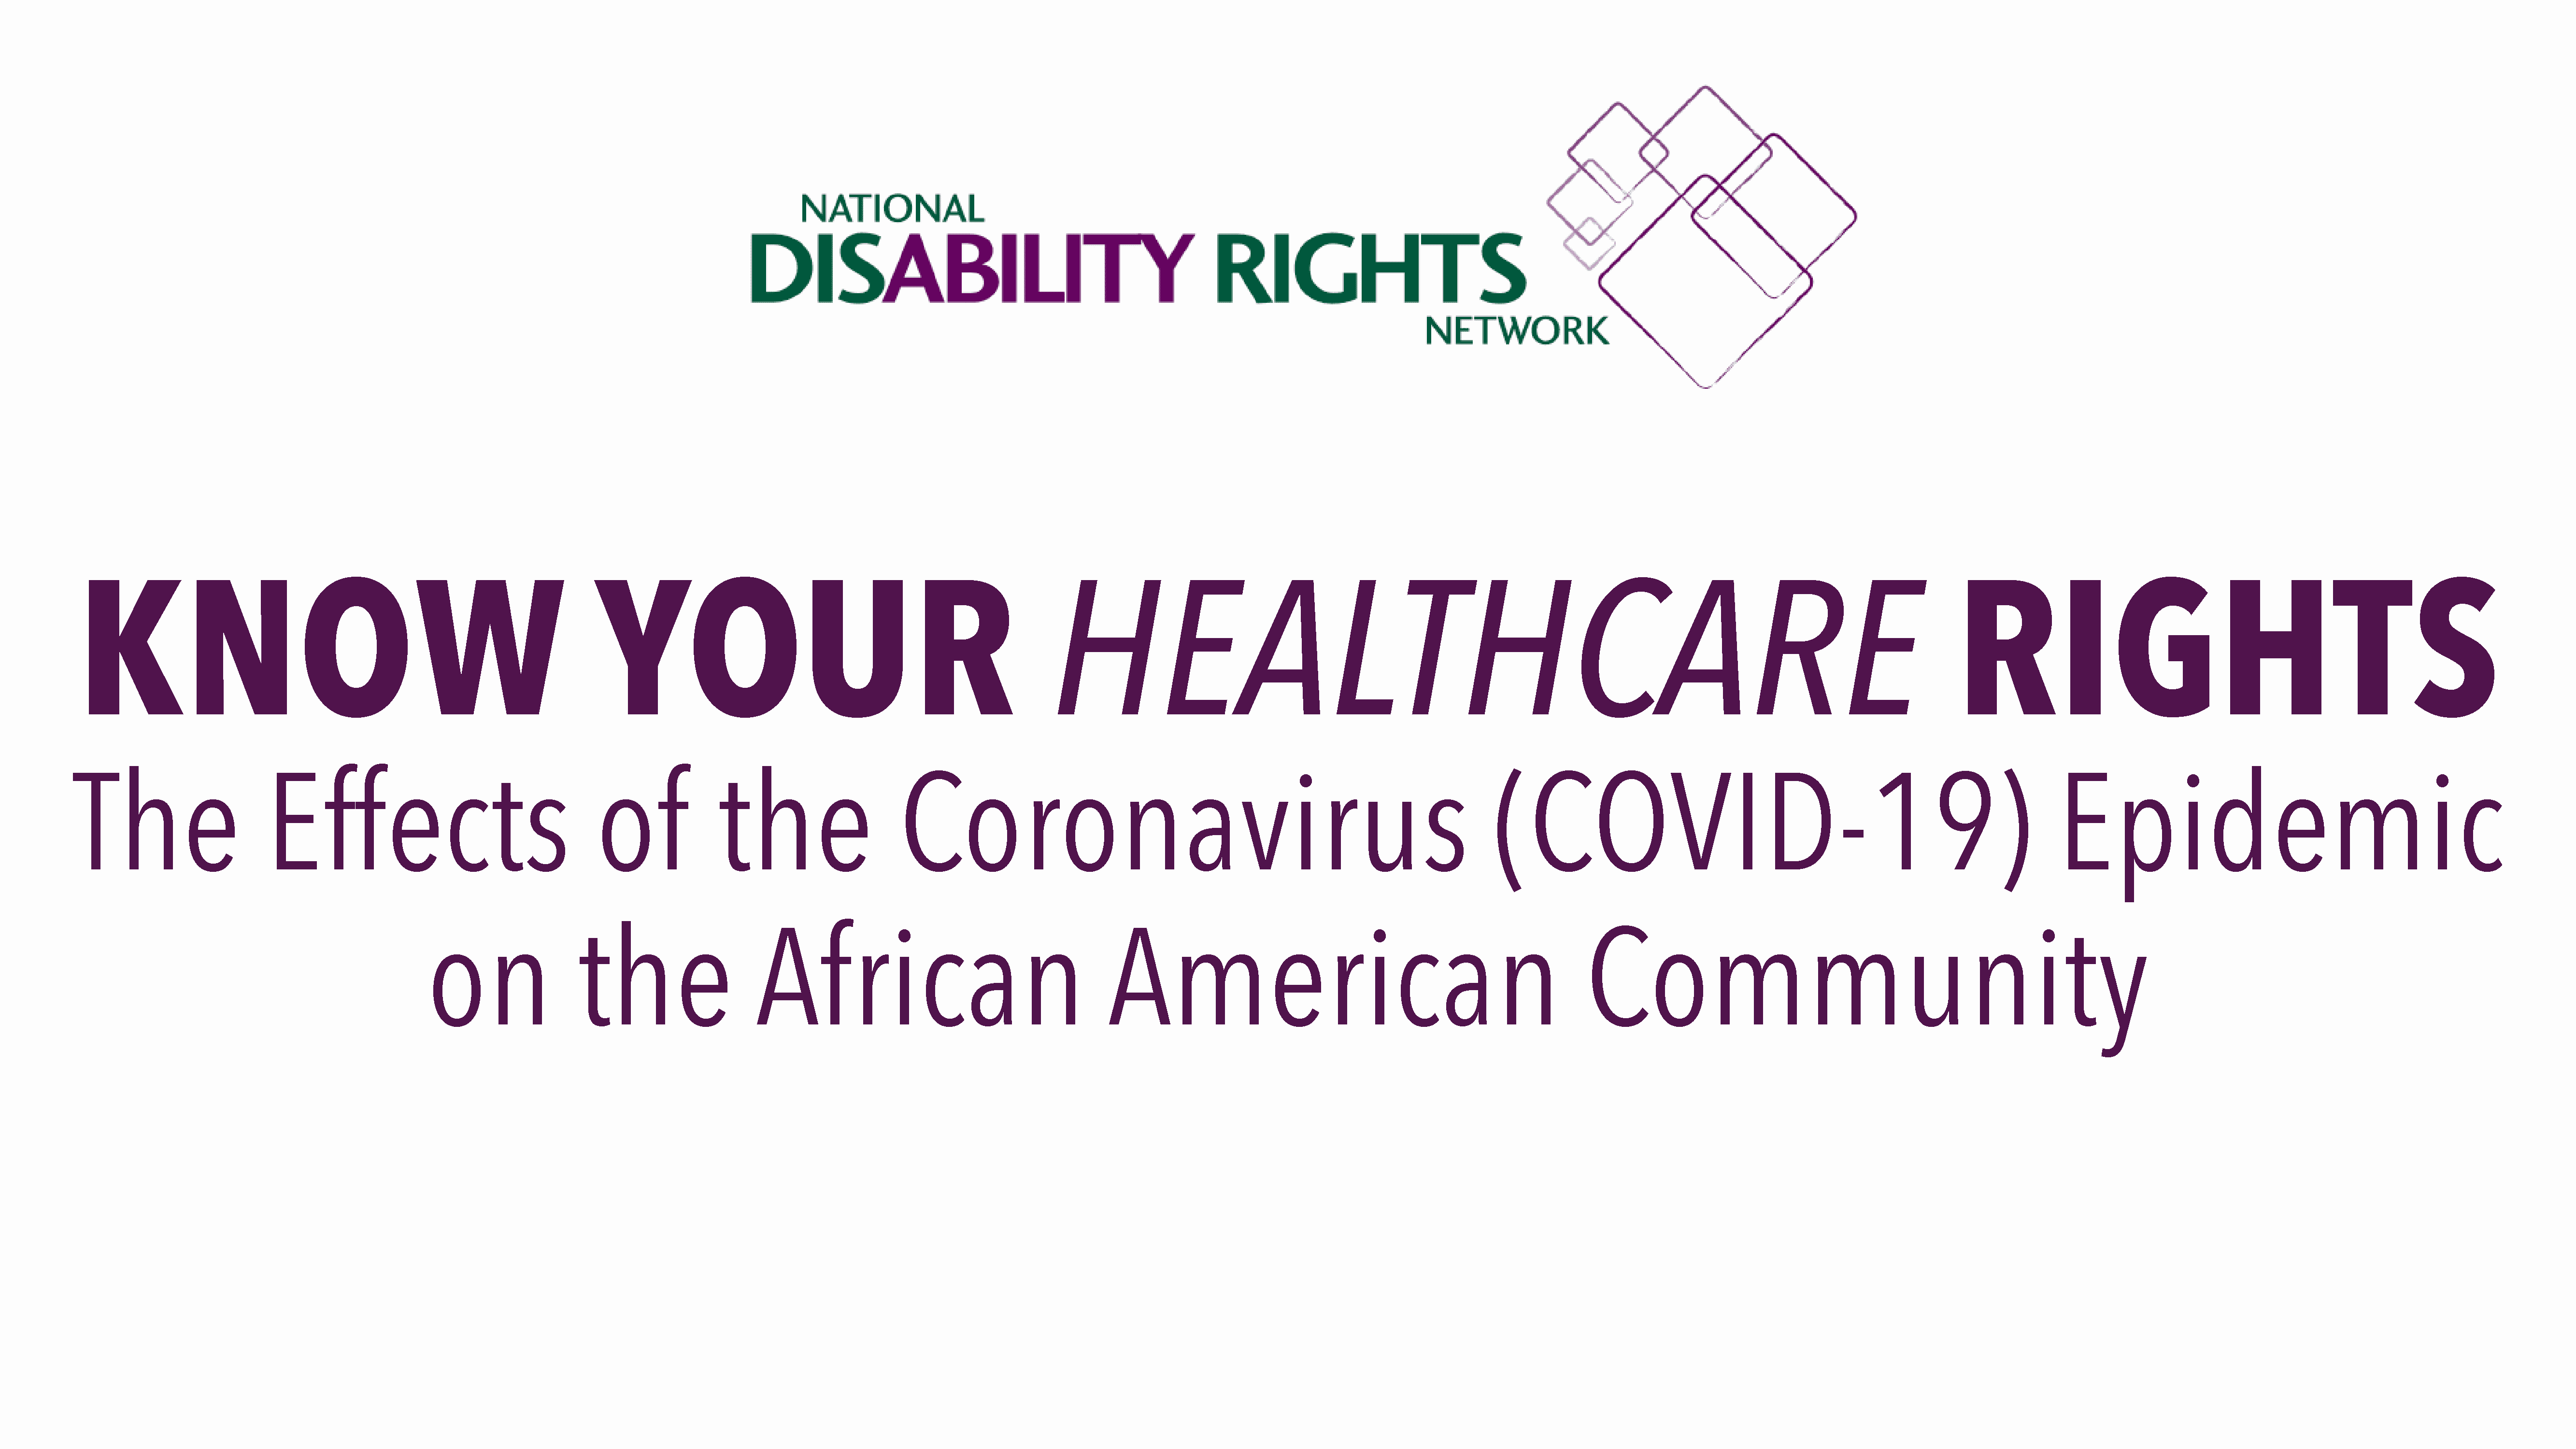 KNOW YOUR HEALTHCARE RIGHTS The Effects of the Coronavirus (COVID-19) Epidemic on the African American Community with NDRN logo above